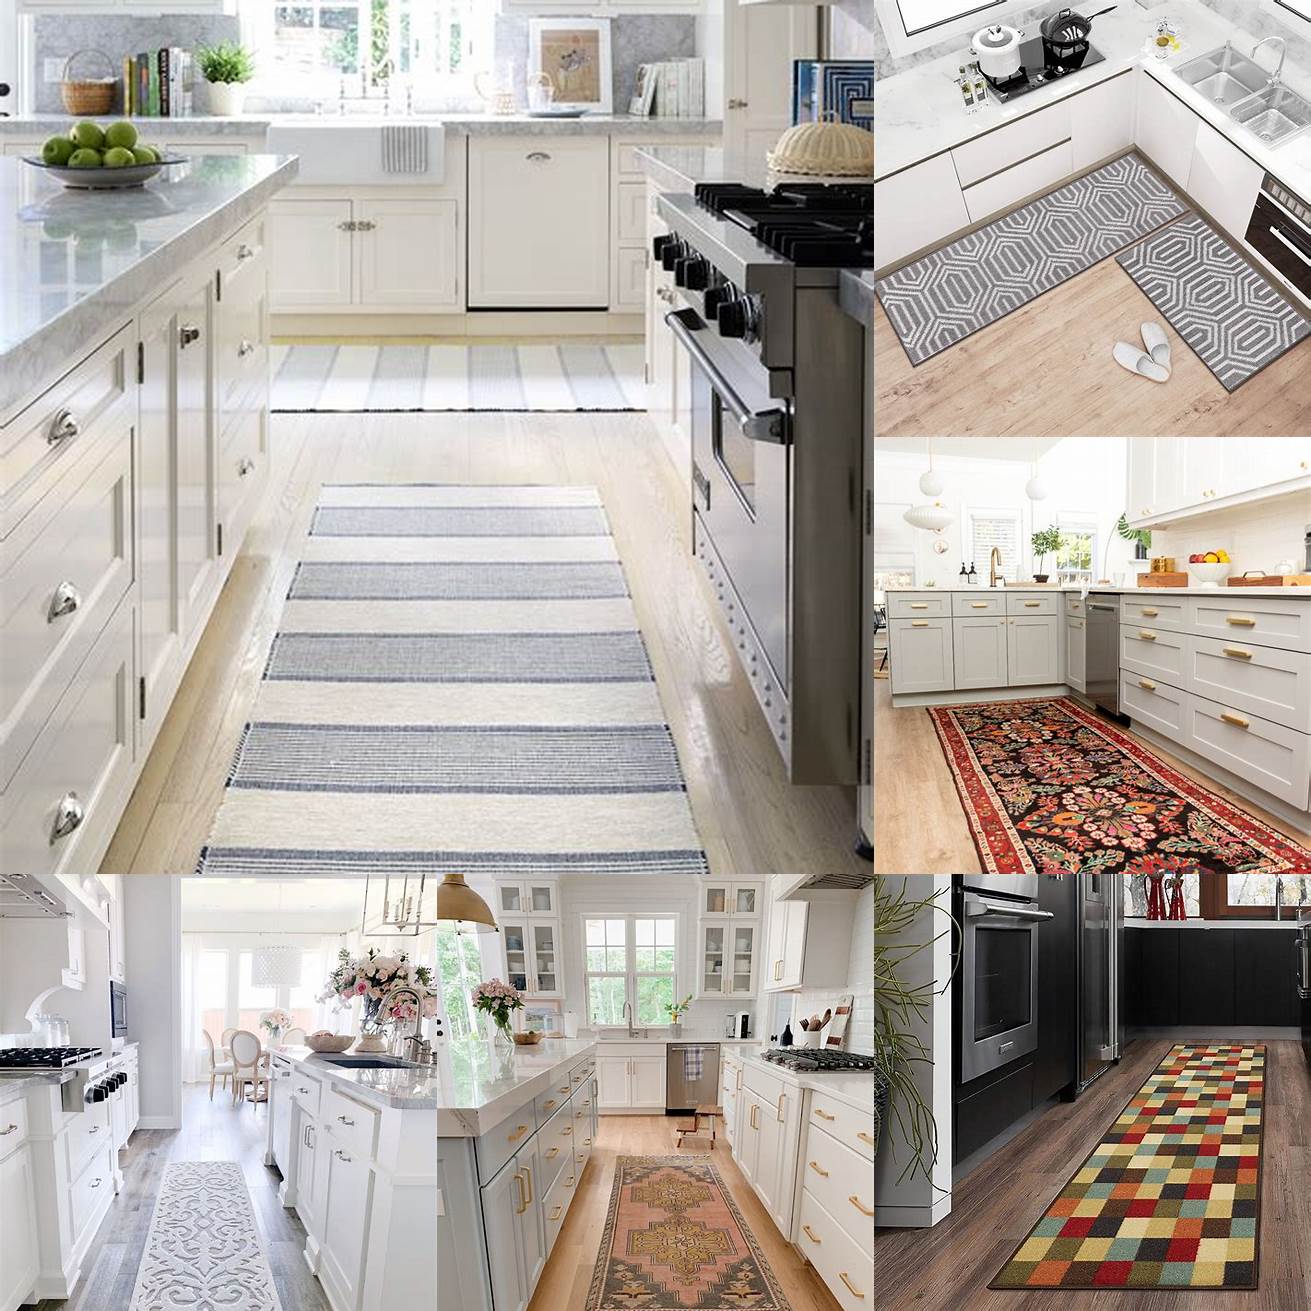 Image of a kitchen with a rug on the floor